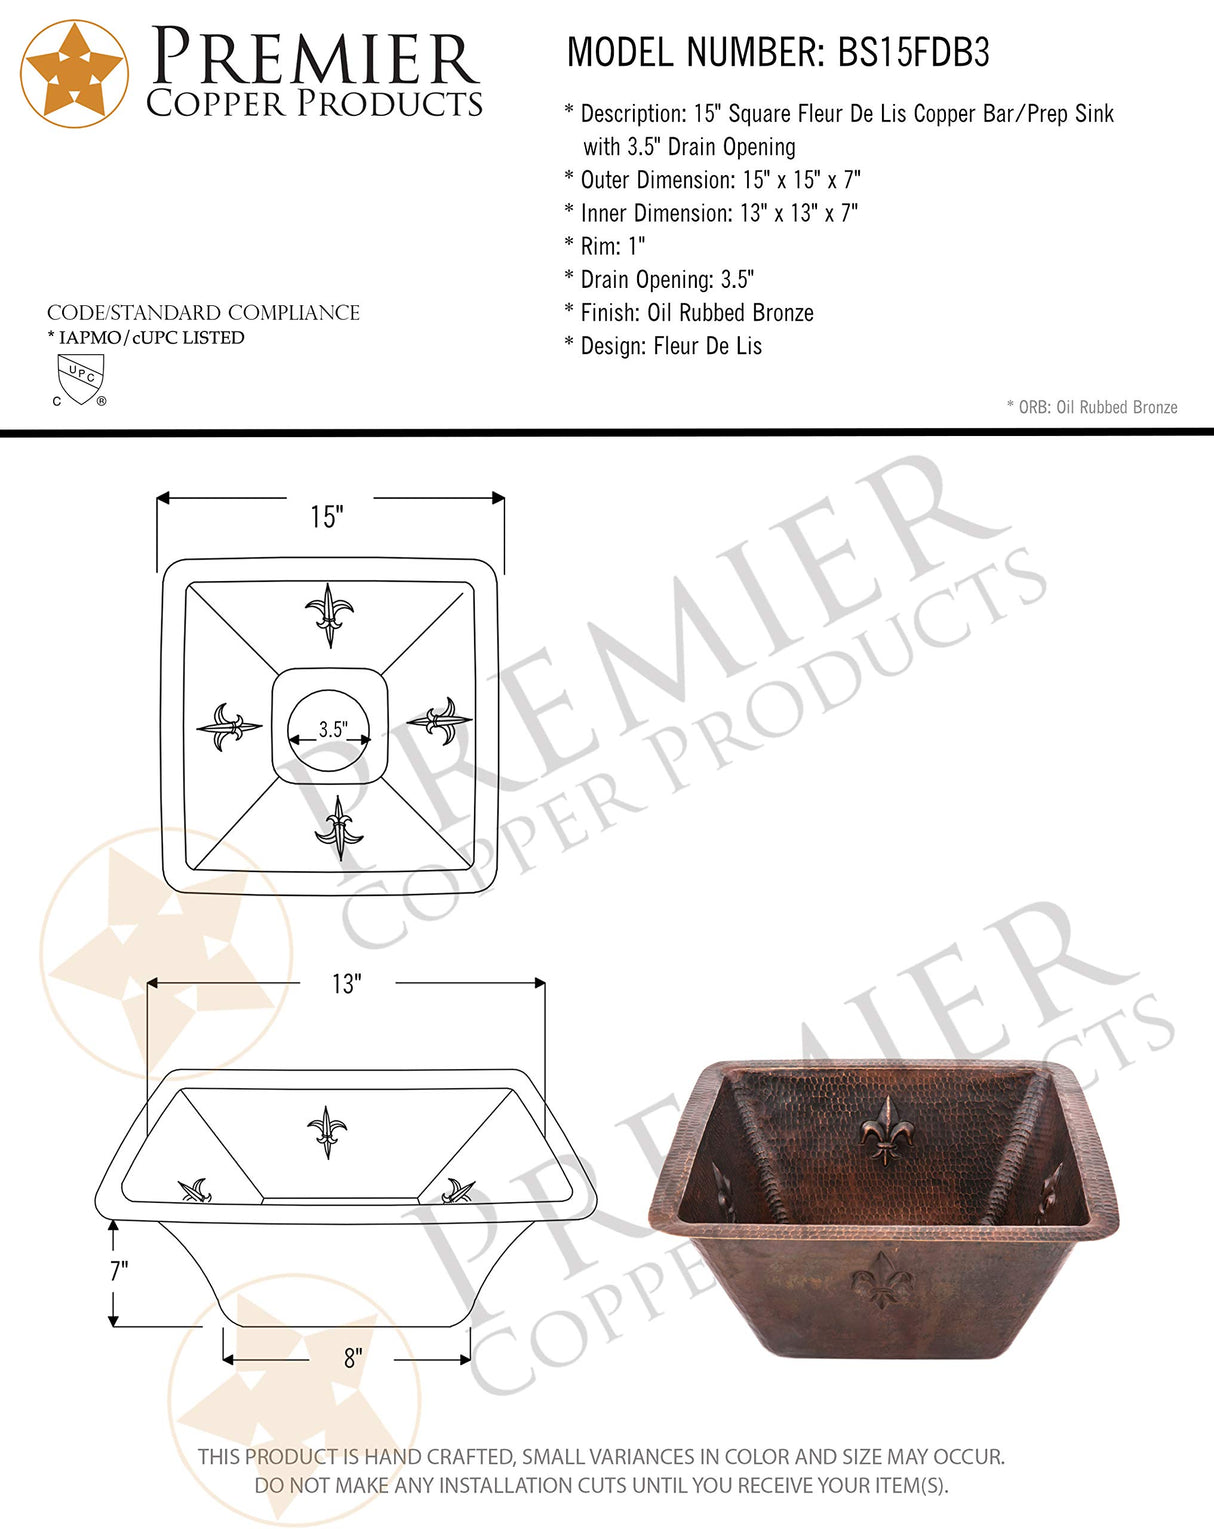 Premier Copper Products BS15FDB3 15-Inch Universal Square Fleur De Lis Hammered Copper Sink with 3.5-Inch Drain Size, Oil Rubbed Bronze